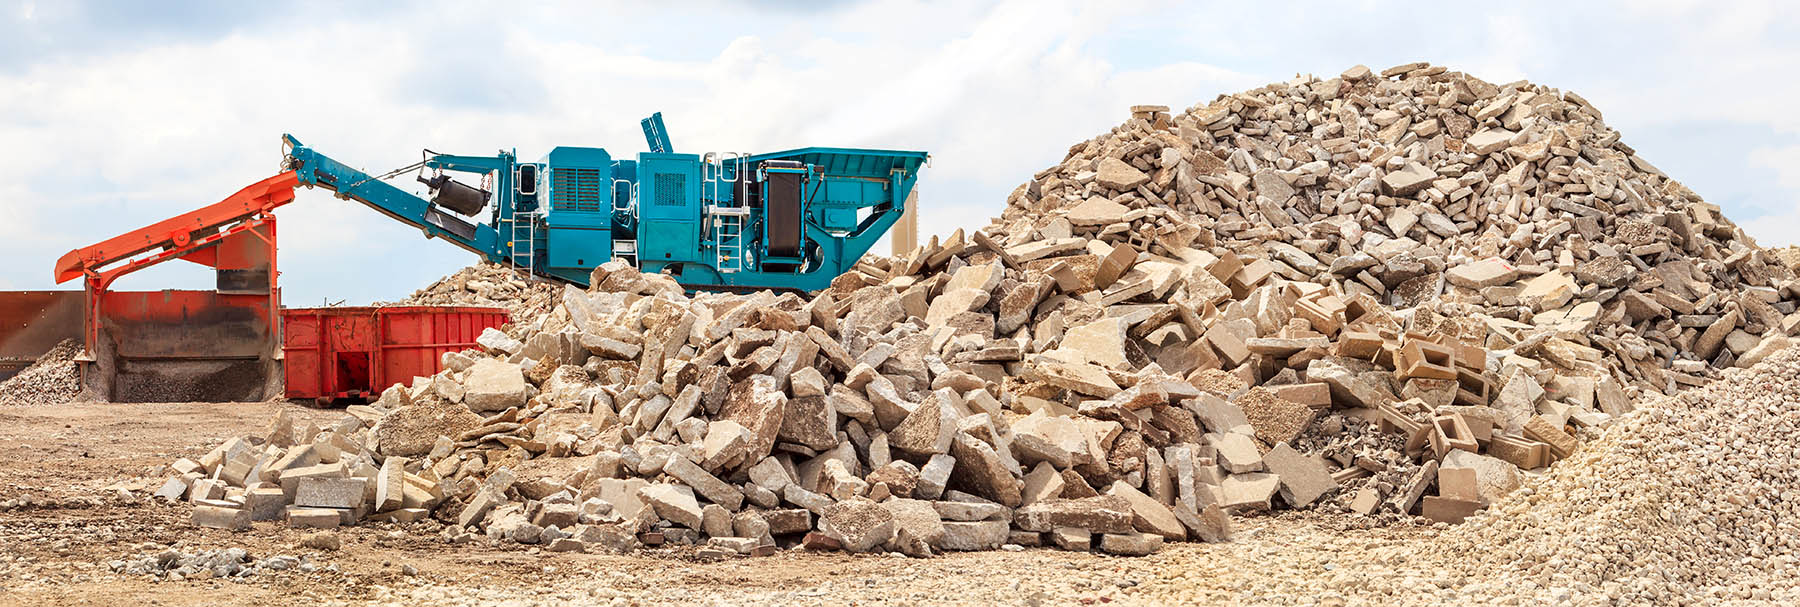 614 Concrete - Concrete Recycling: Reducing Waste and Environmental Impact